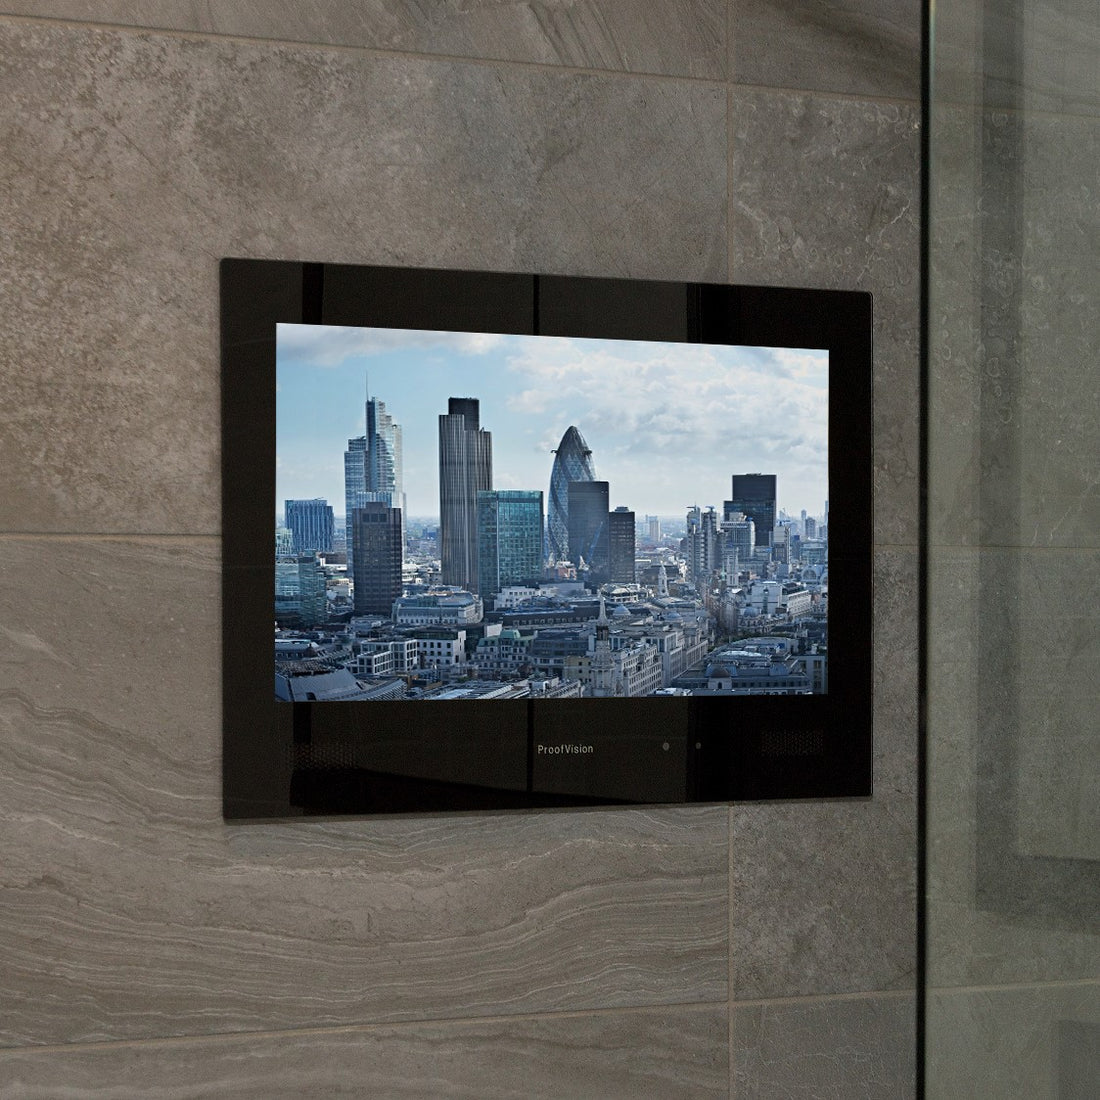 ProofVision 24inch Premium Bathroom Smart TV against tiled wall PV24MF-A